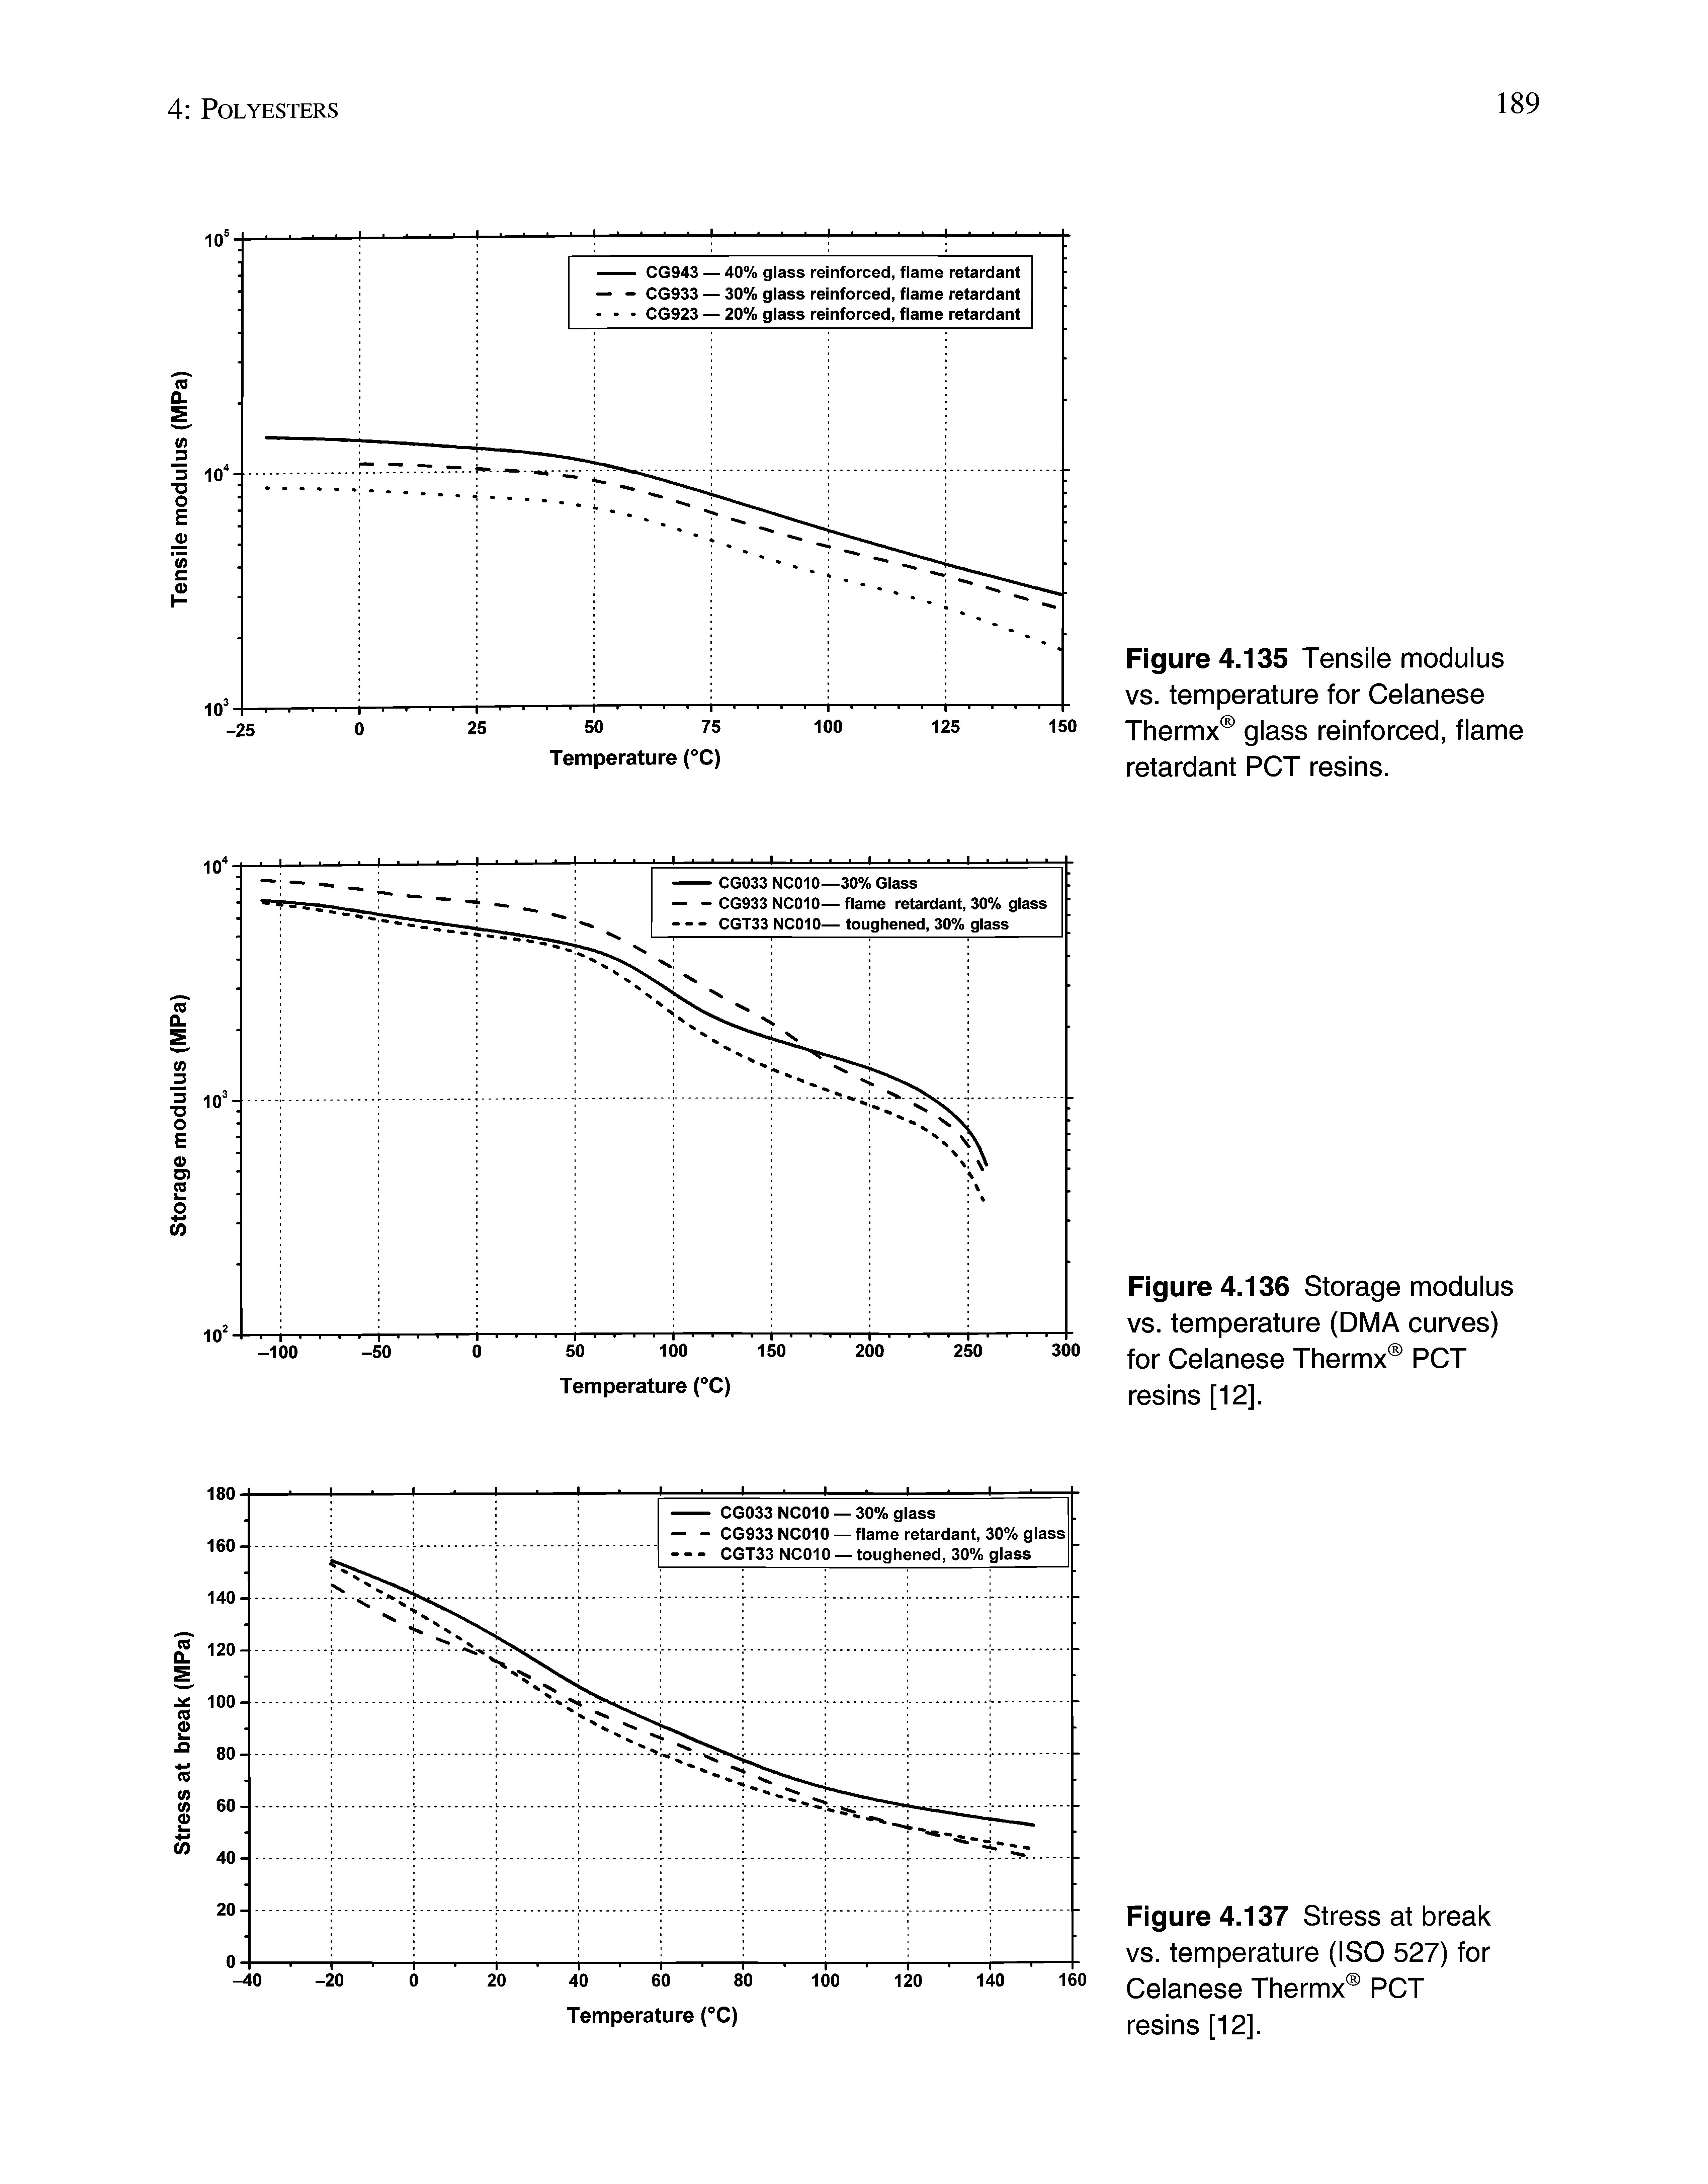 Figure 4.136 Storage modulus vs. temperature (DMA curves) for Celanese Thermx PCT resins [12].